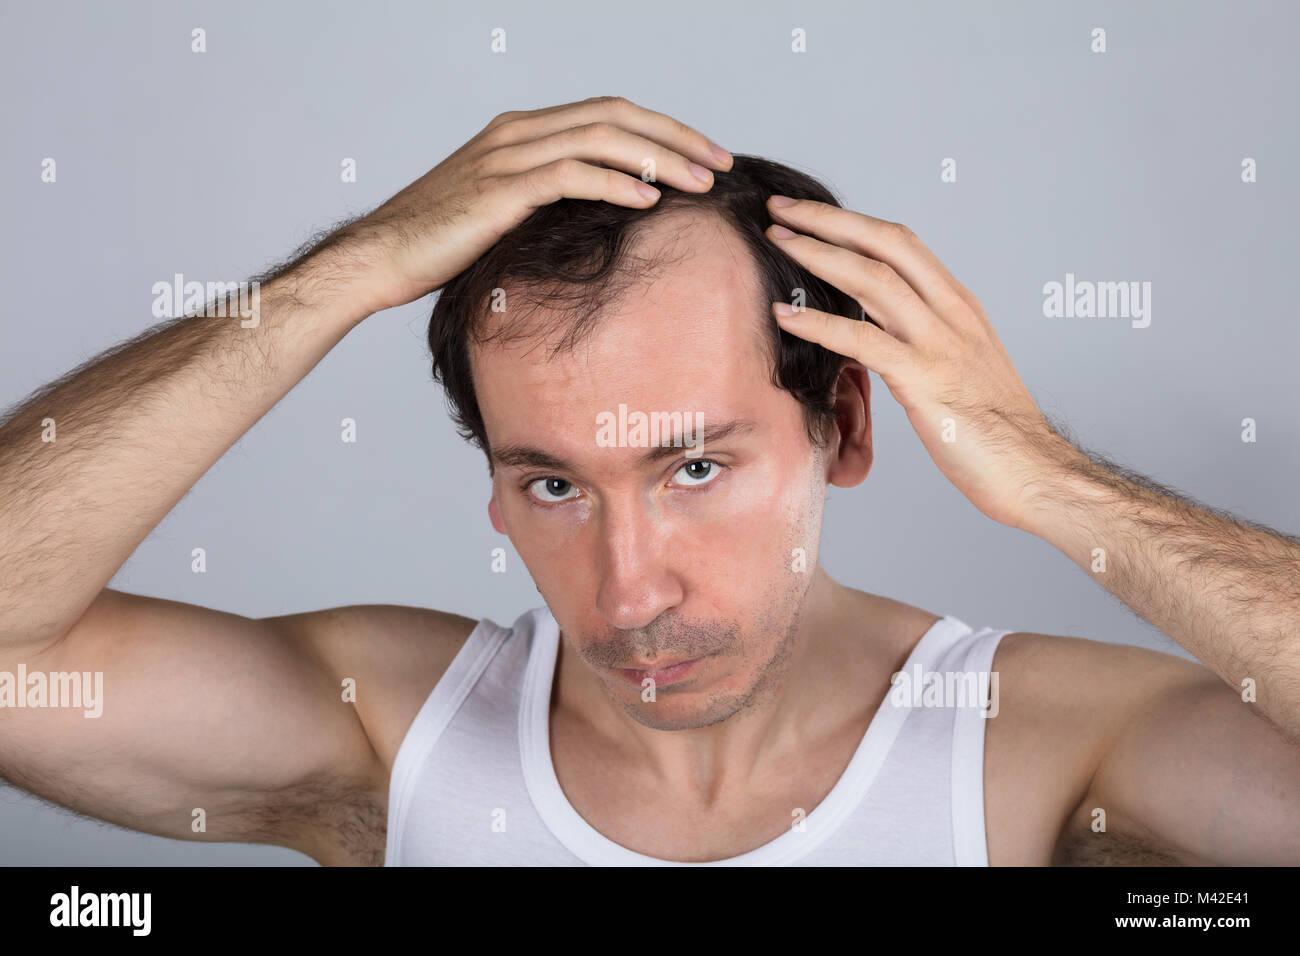 Man Suffering From Hair Loss Against Grey Background Stock Photo